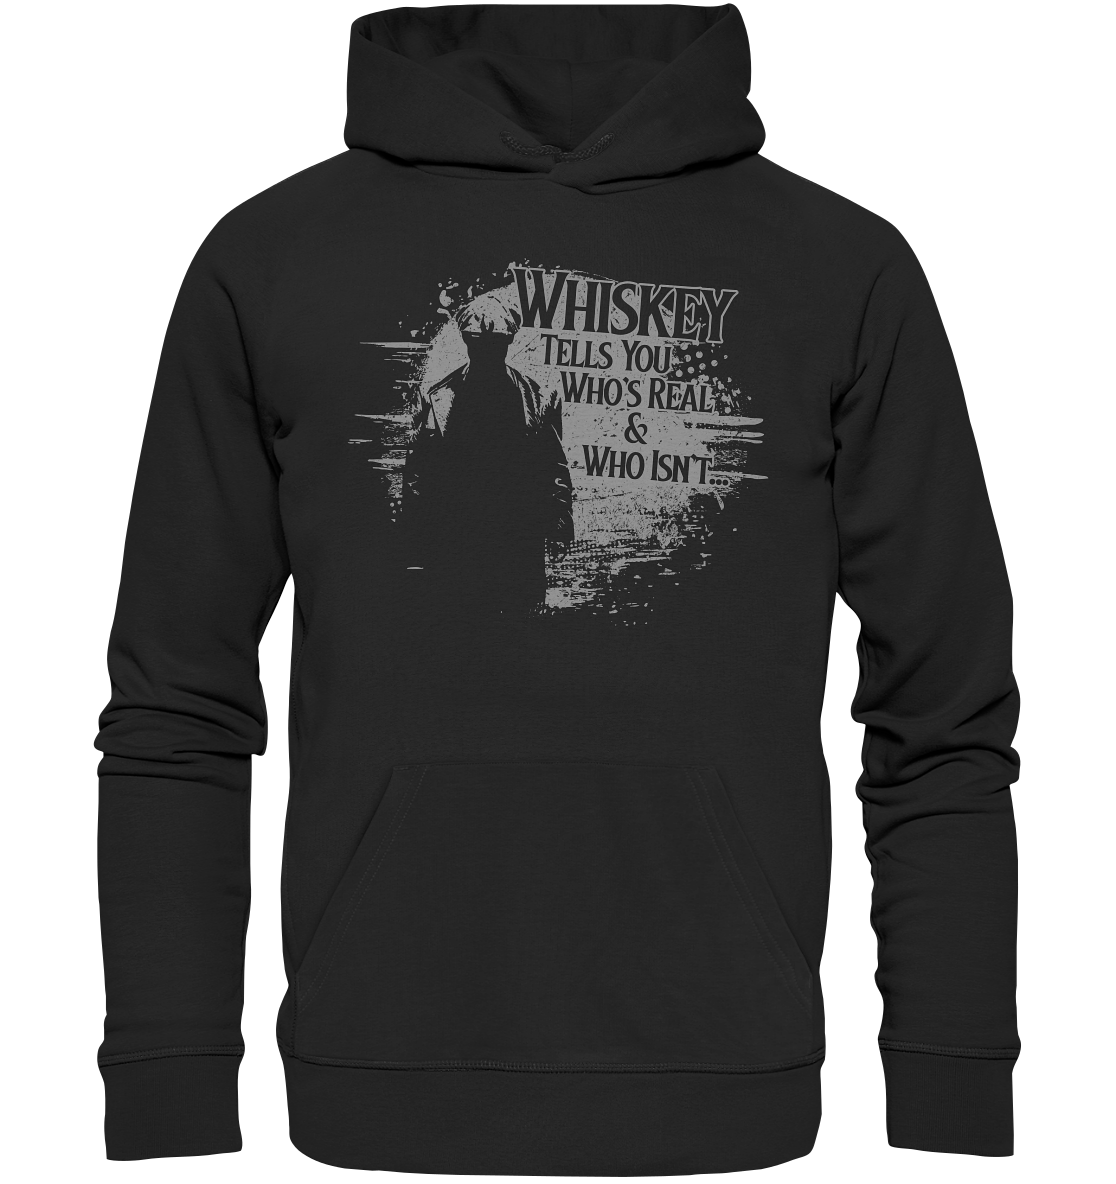 Whiskey Tells You Who's Real & Who Isn't - Premium Unisex Hoodie